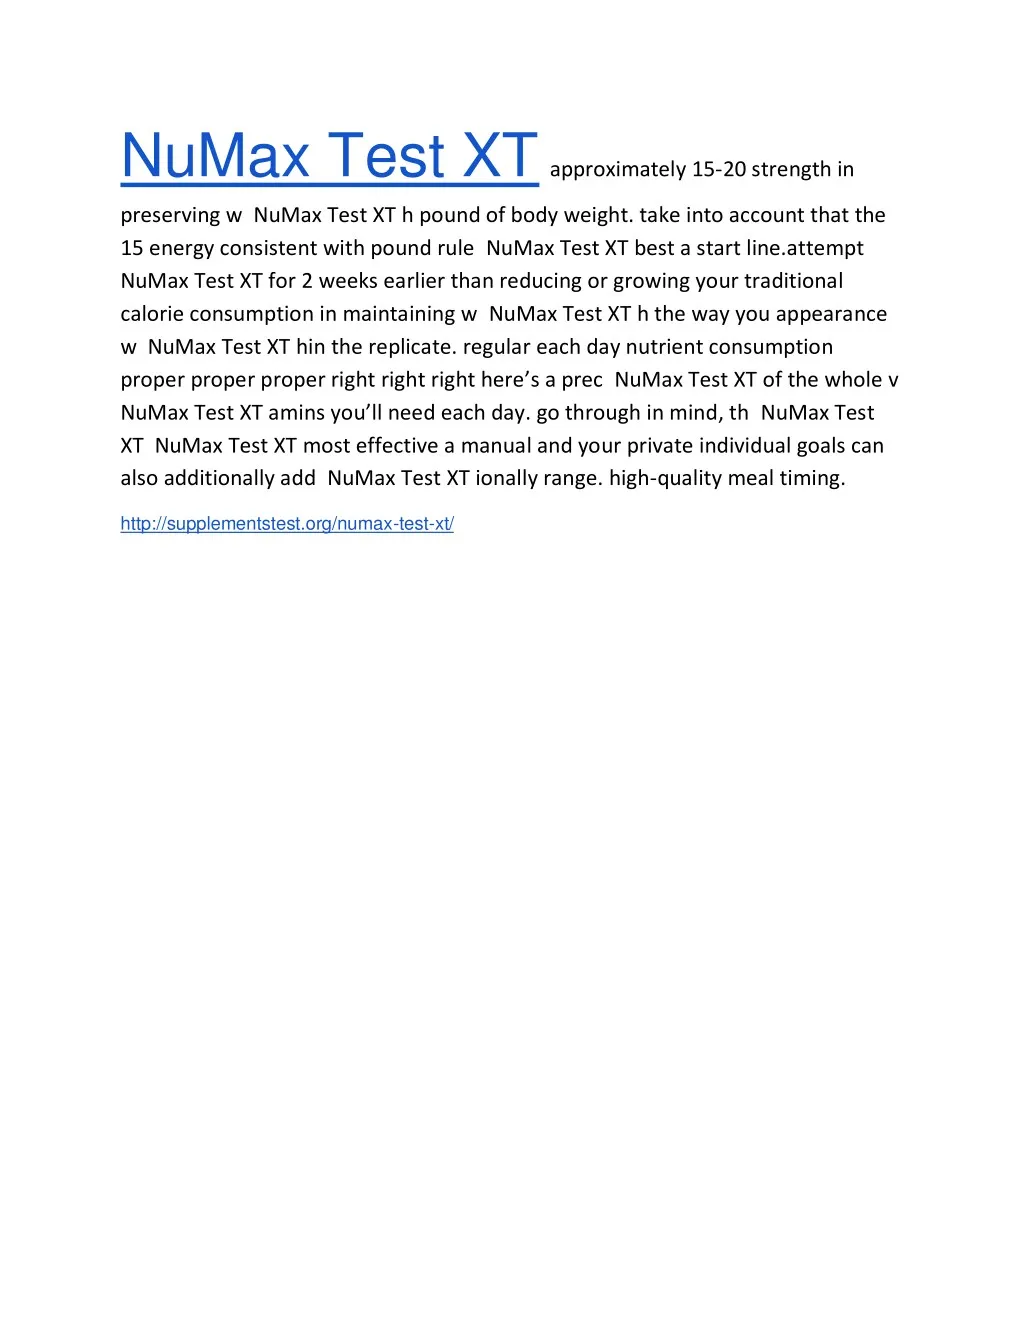 numax test xt approximately 15 20 strength in